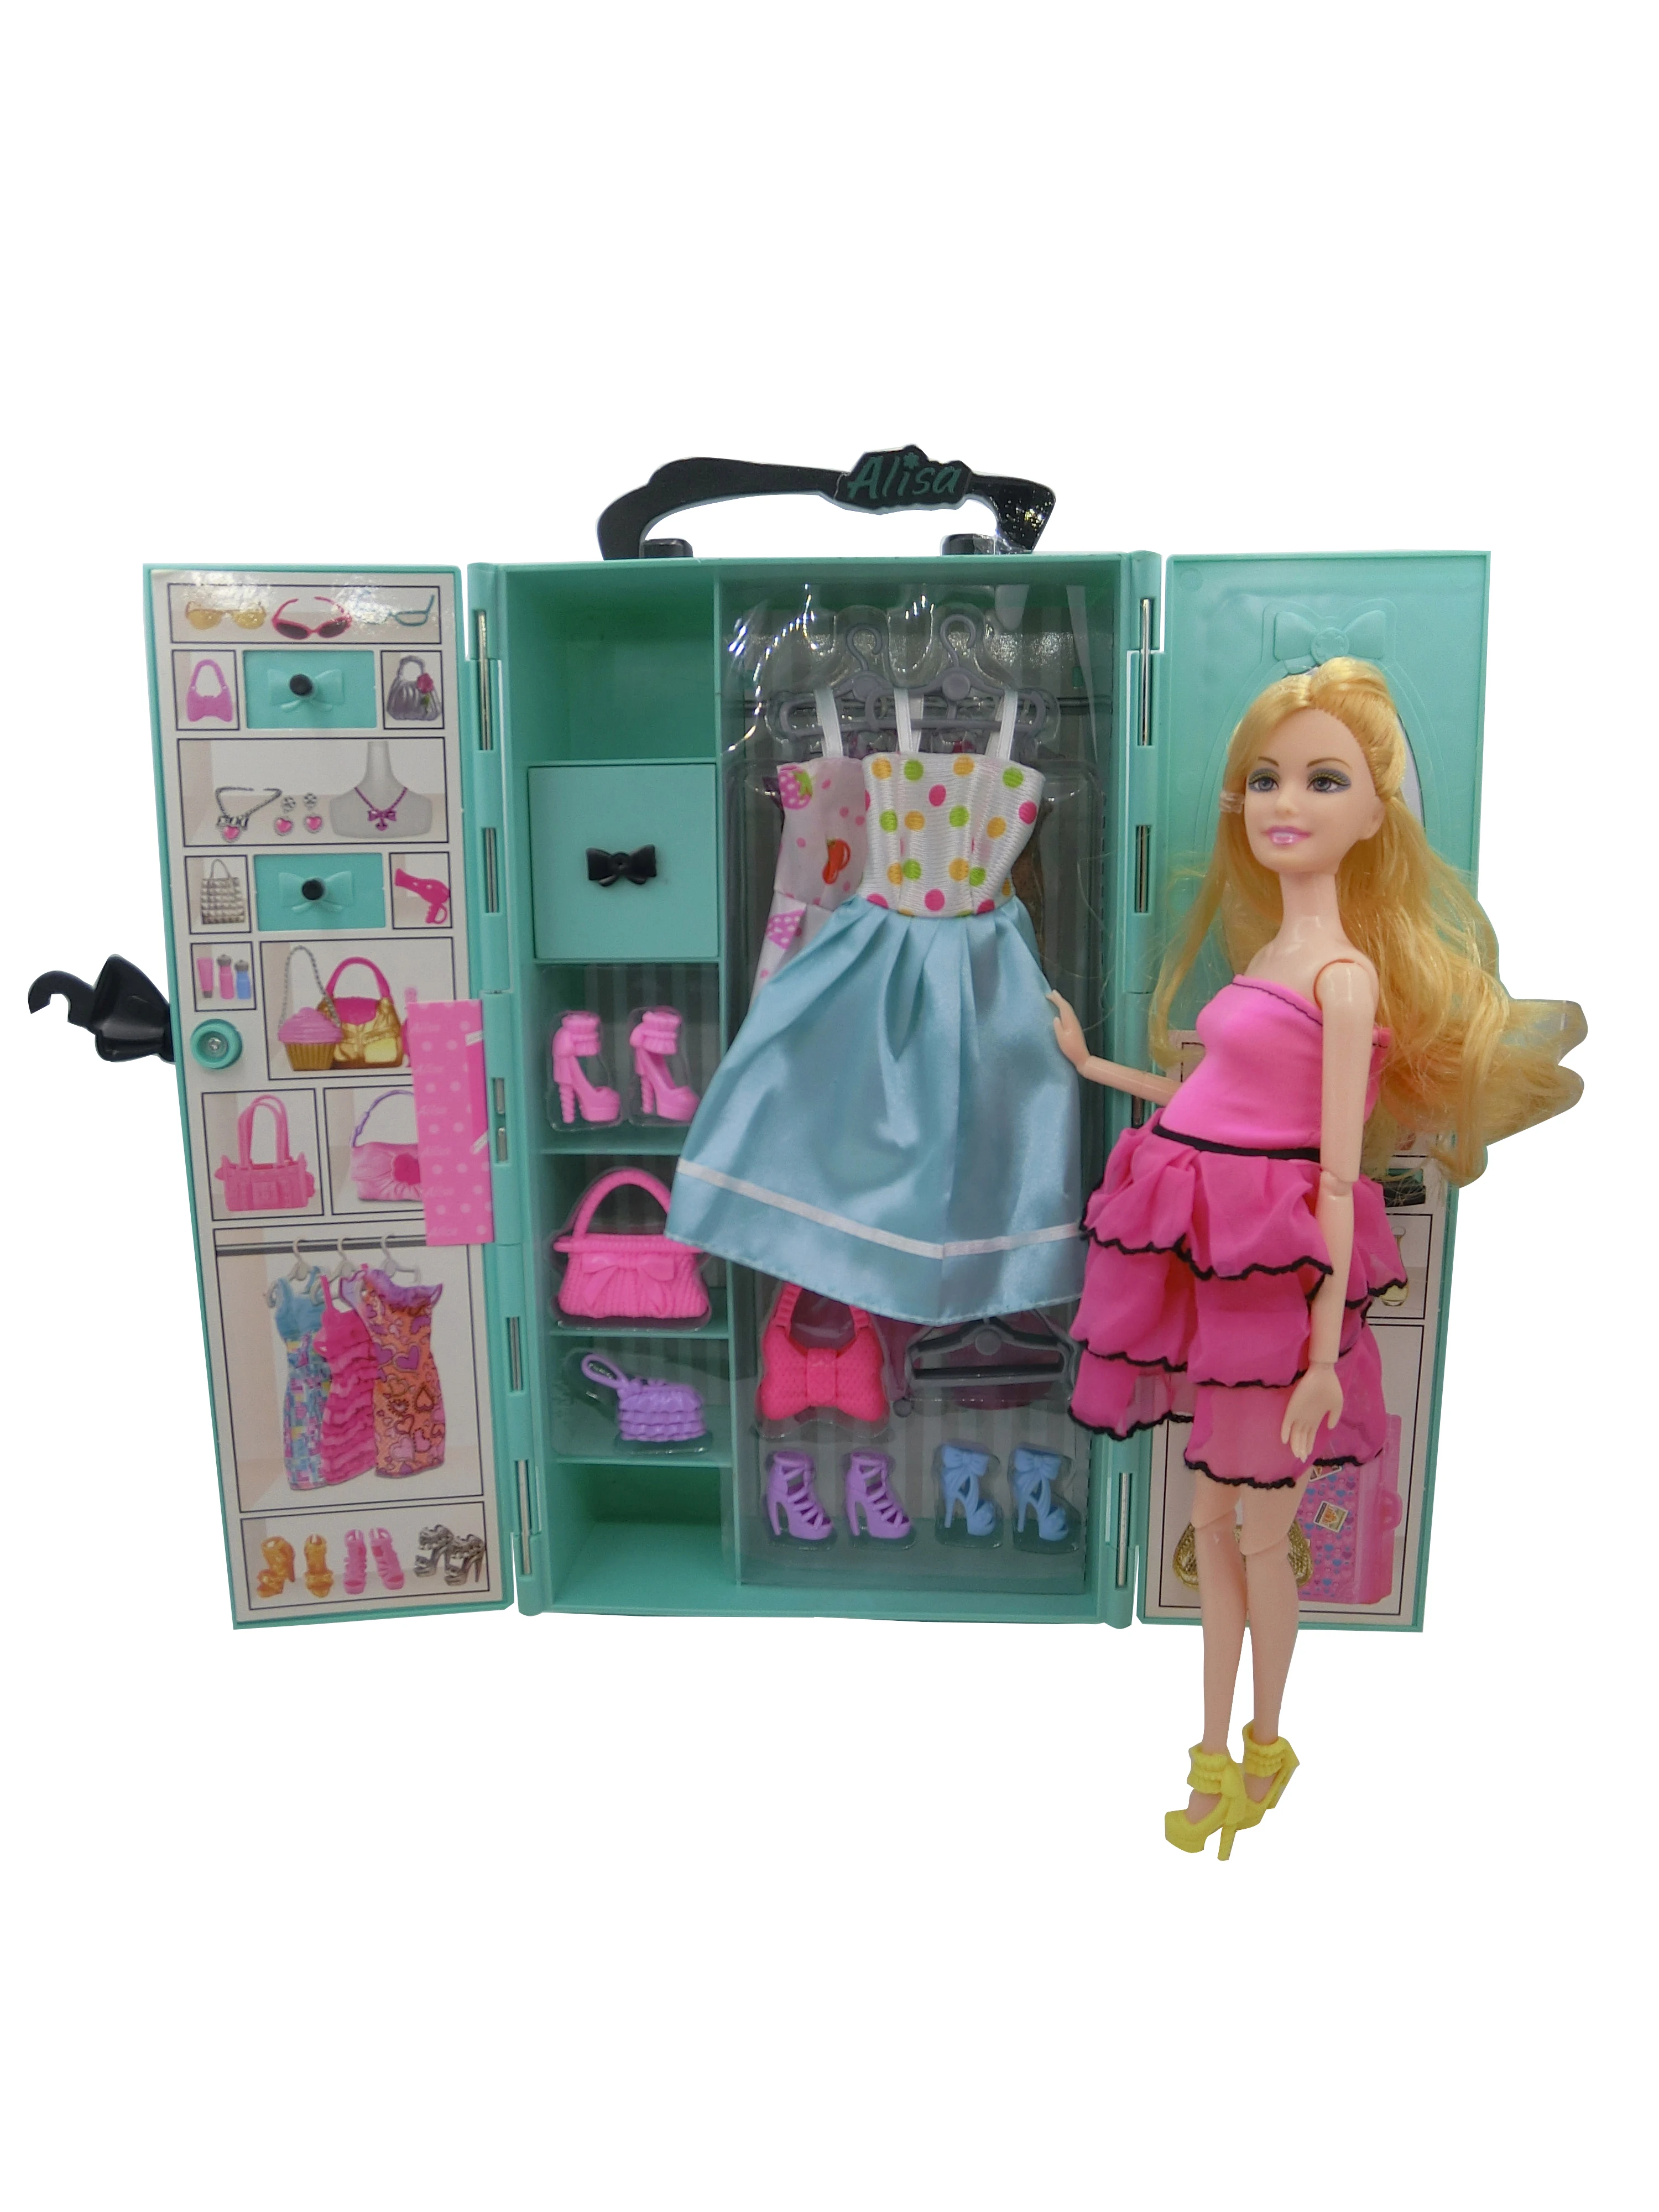 Fashion 73 Items/Set=Dollhouse Furniture Wardrobe +16 Clothes +10 Shoes +10 Hanger +10 Bags +26 Accessories For Barbie DIY Game